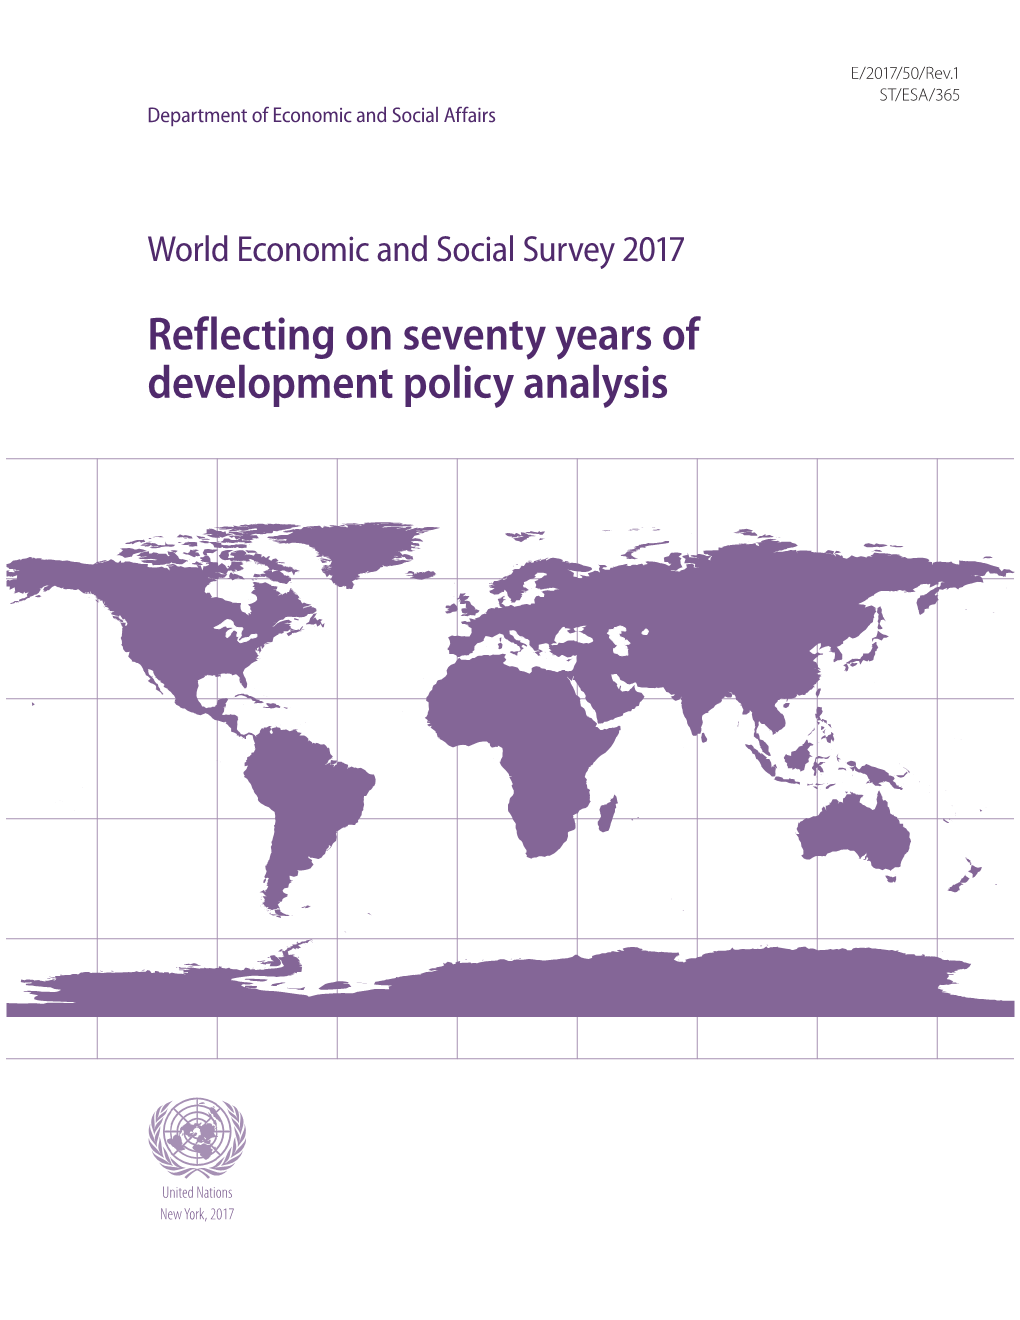 Reflecting on Seventy Years of Development Policy Analysis